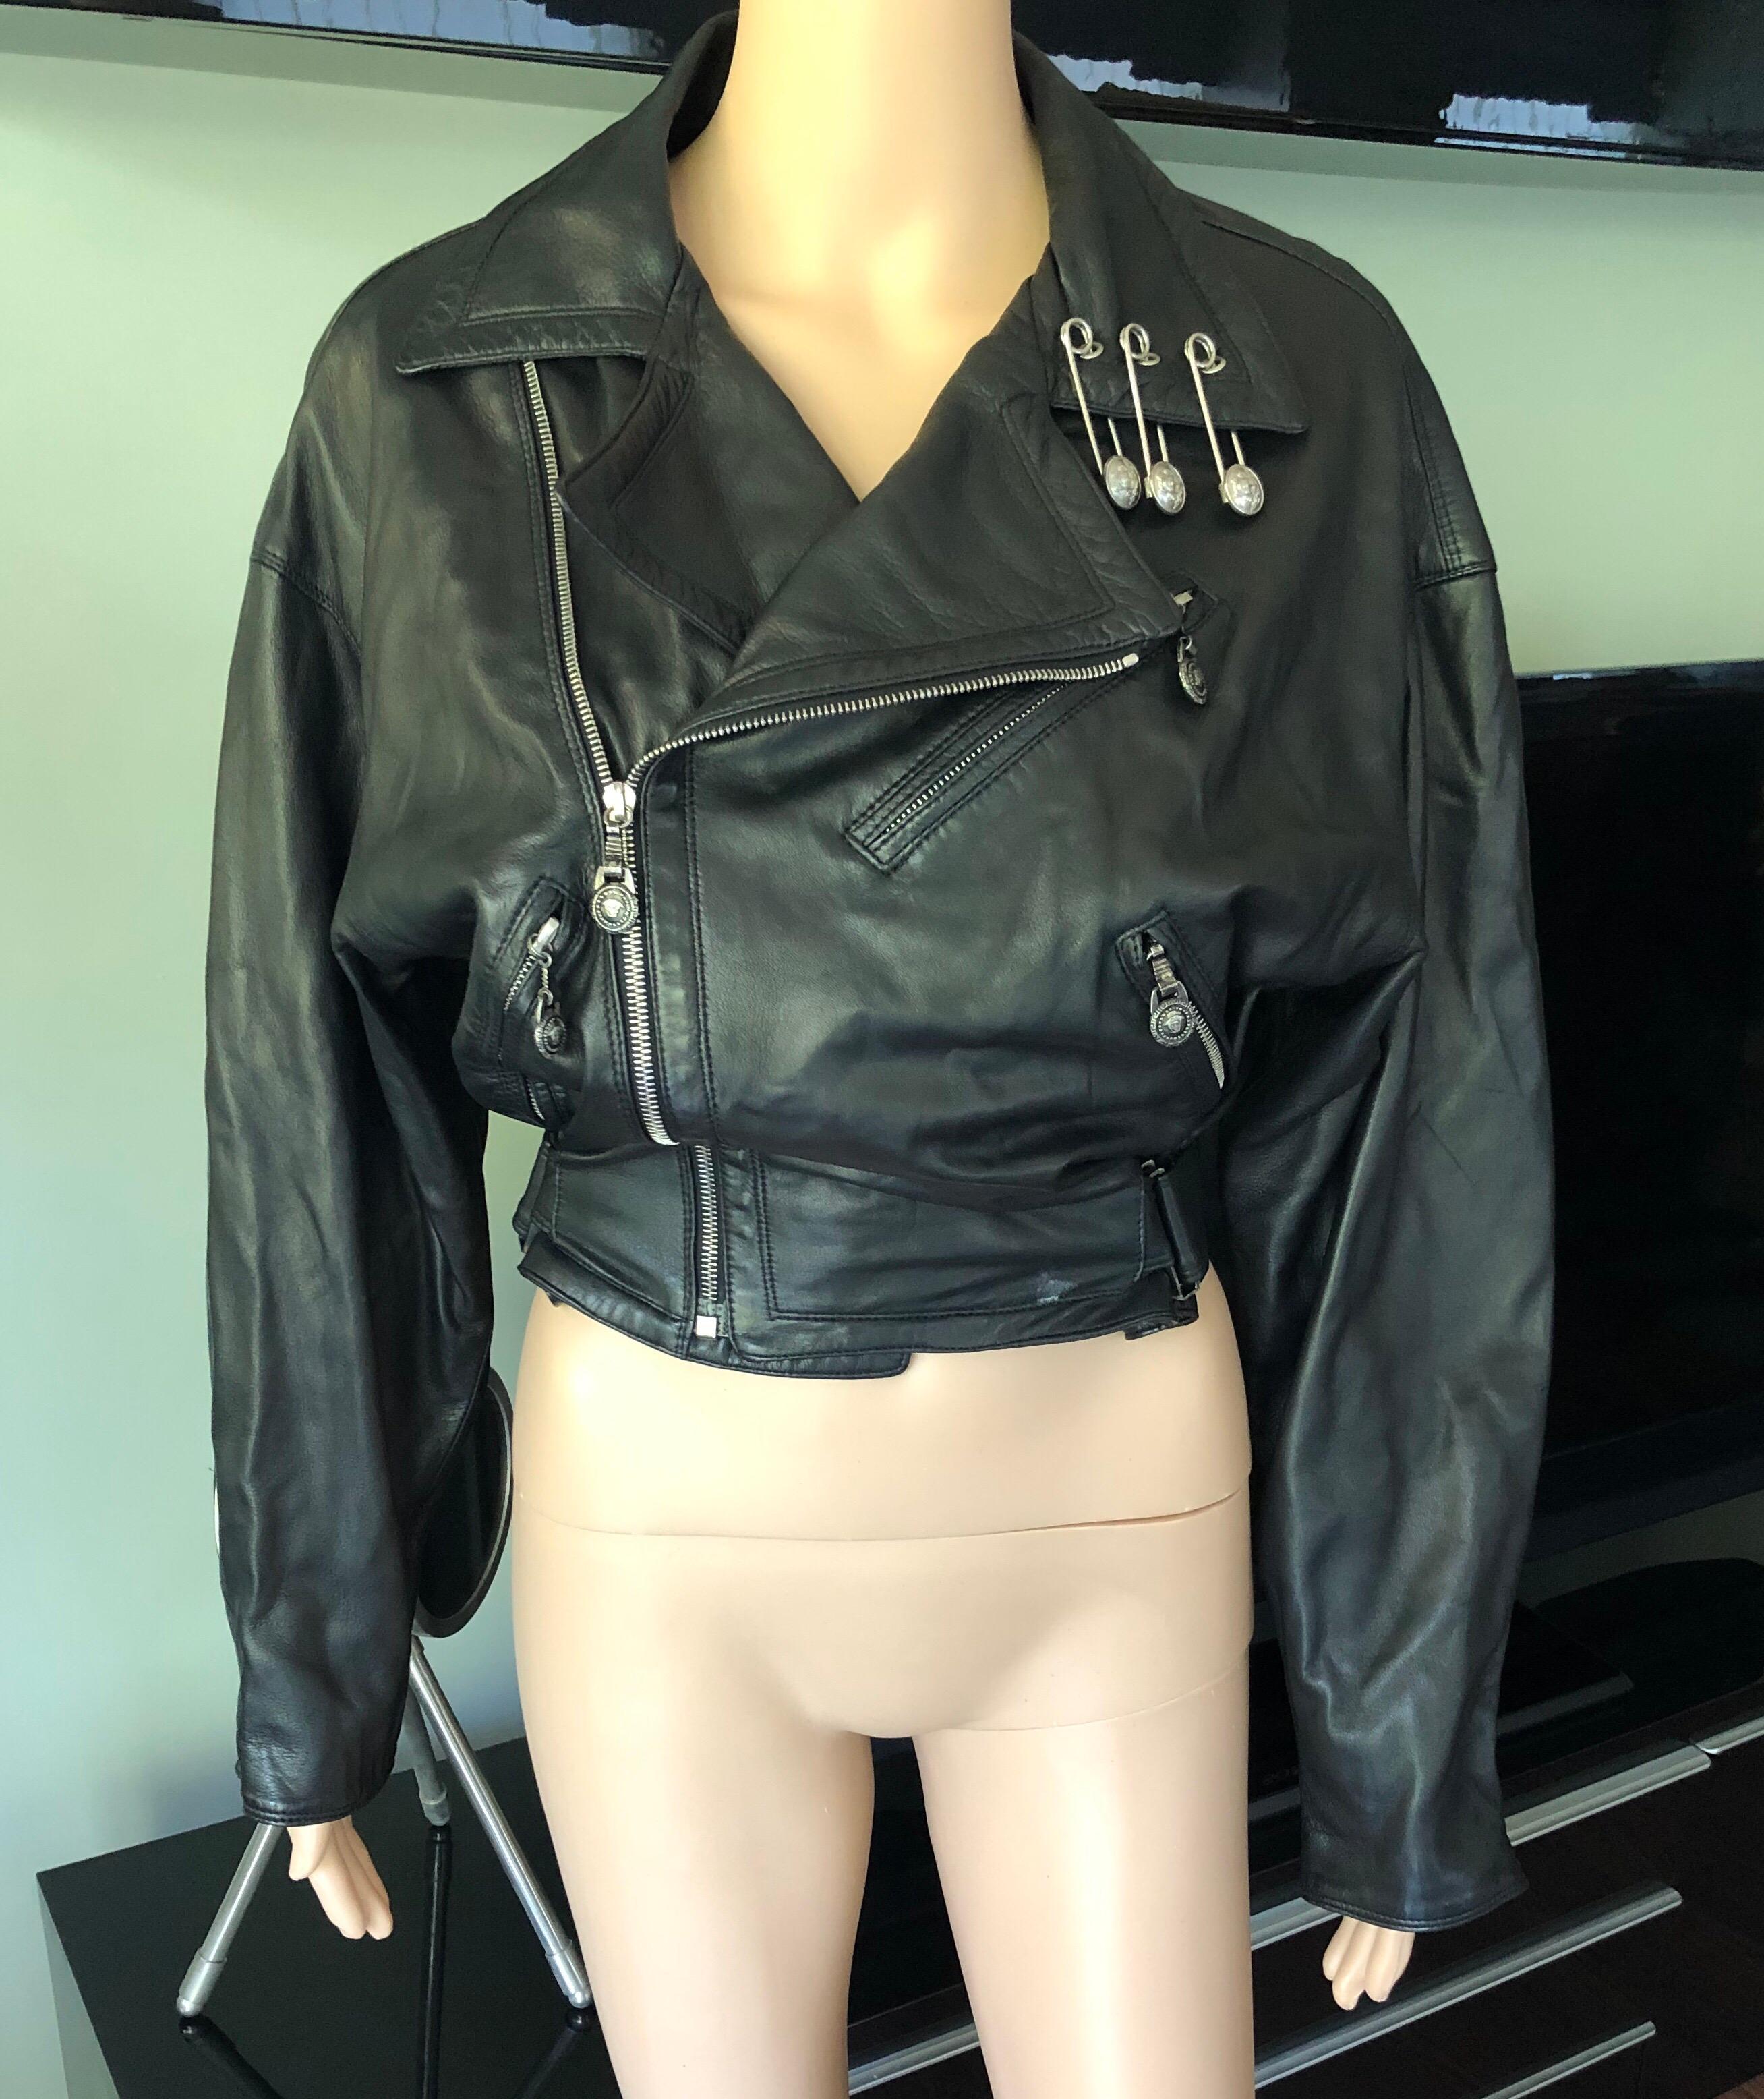 Gianni Versace S/S 1994 Vintage Safety Pins Black Leather Jacket Coat

Black Gianni Versace vintage leather jacket with notched lapel, three pockets and exposed zip closure at front. Please note the size tag has been removed but this jacket will fit